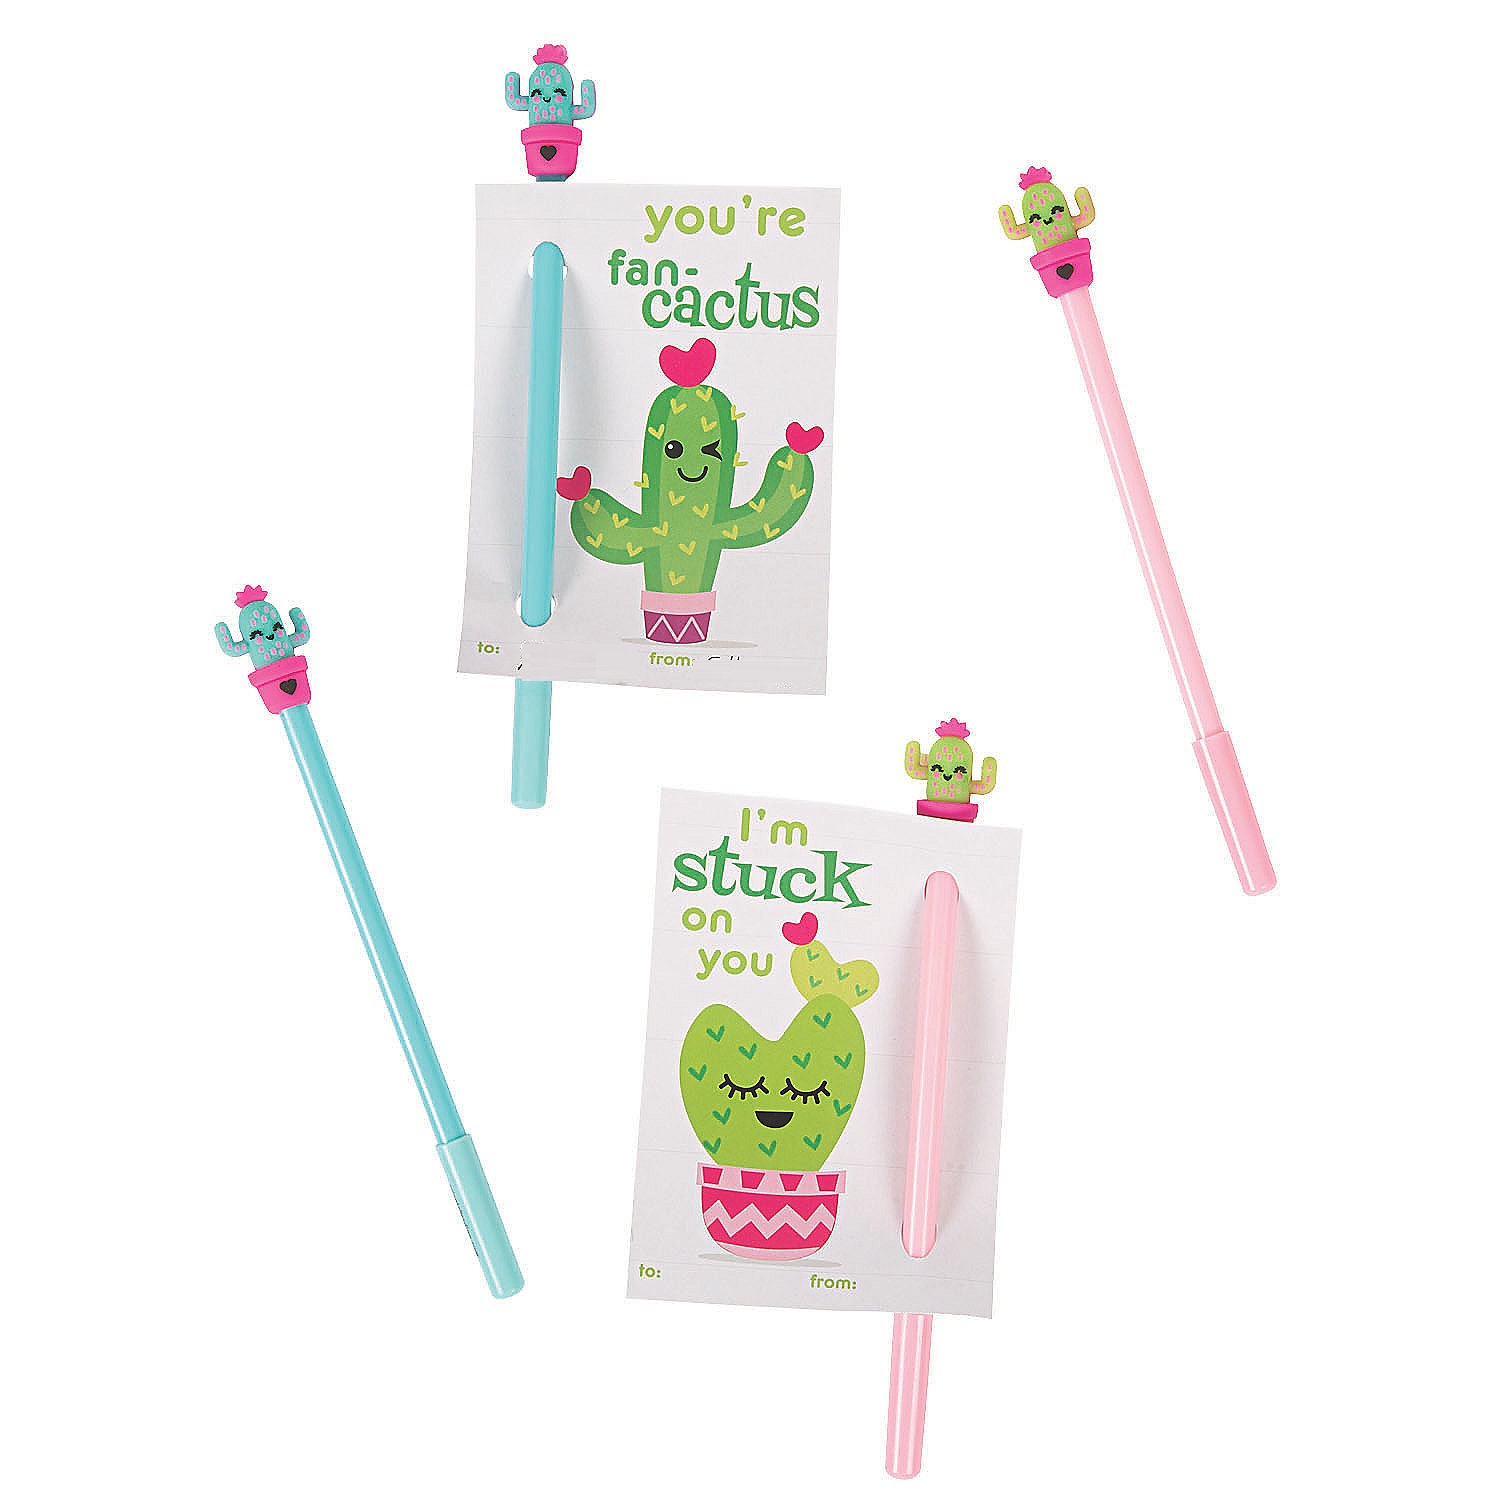 cactus-pen-valentine-exchanges-with-card-for-12~13933300